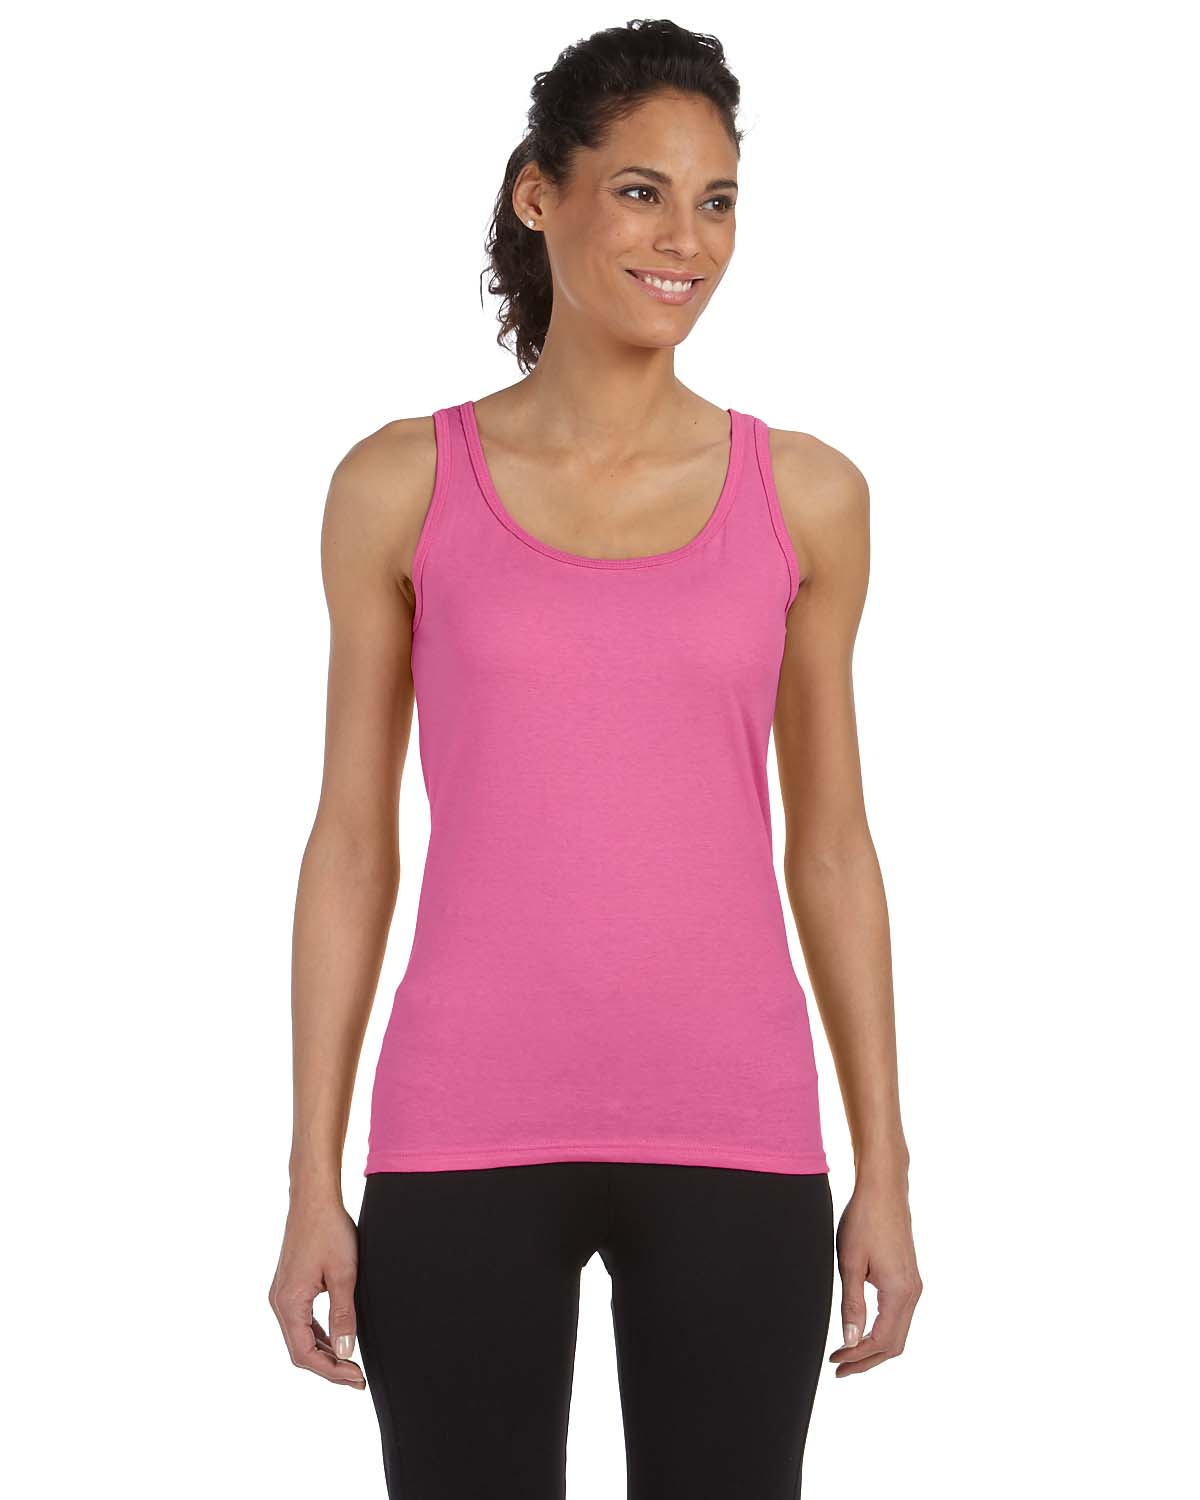 Gildan Ladies' Softstyle® 4.5 oz. Fitted Tank